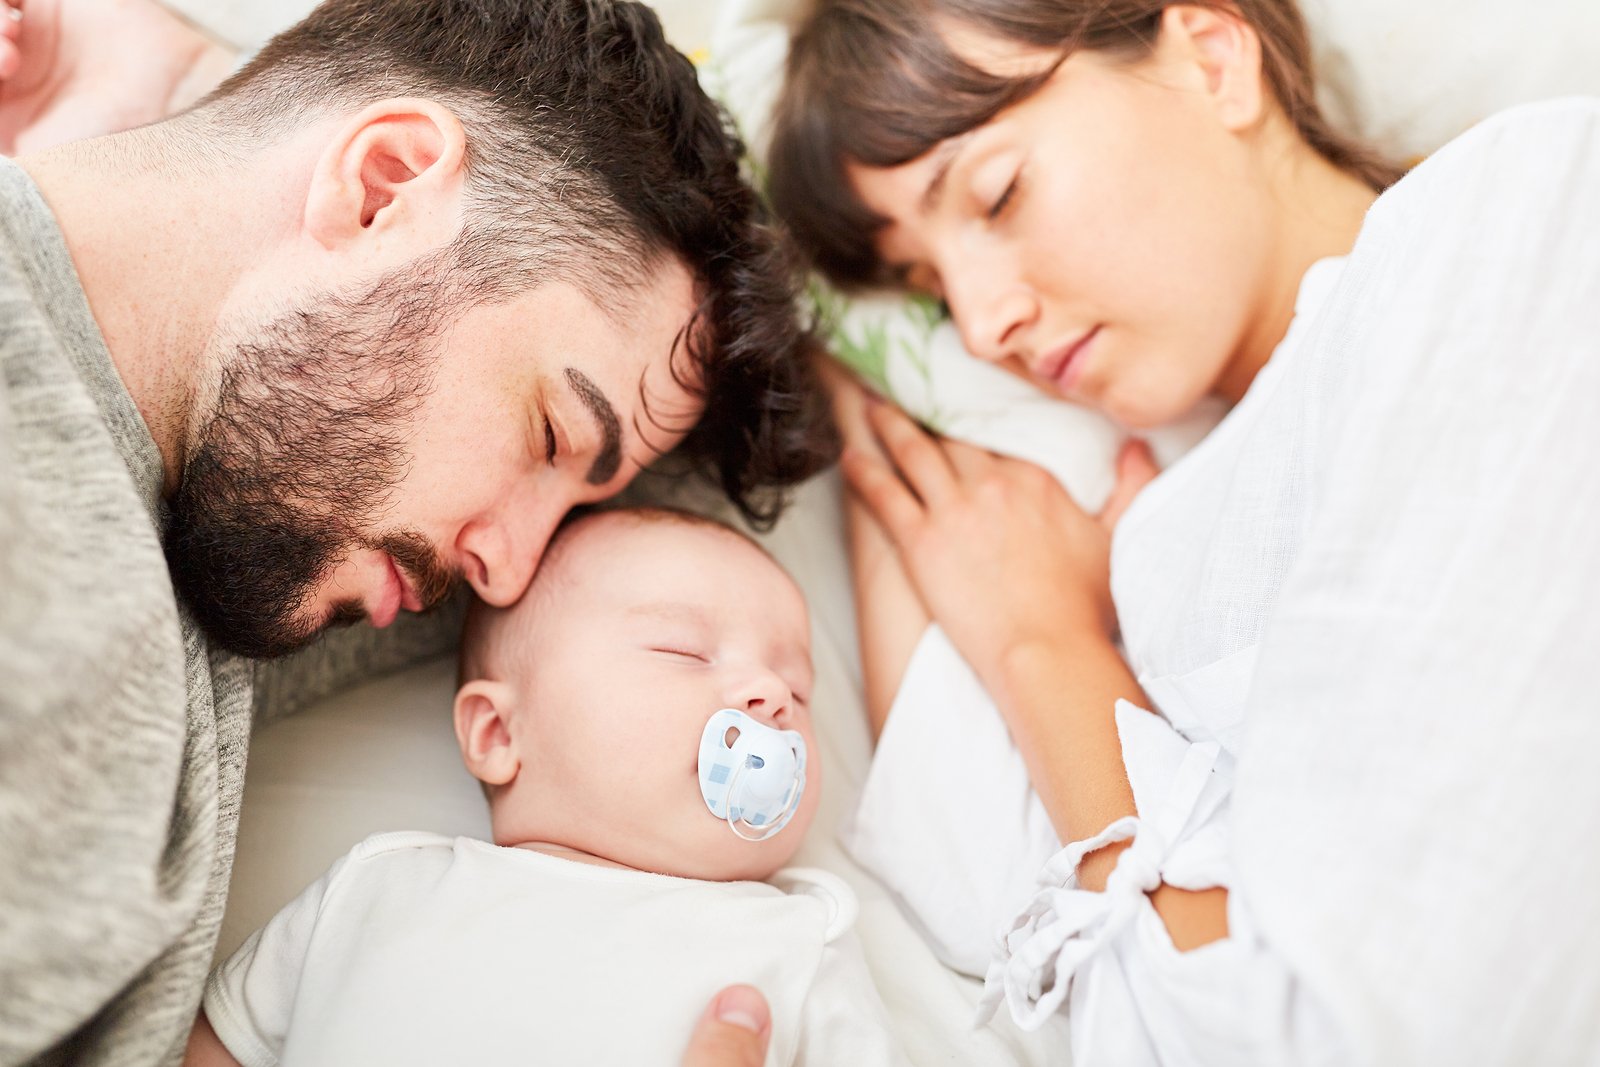 parents co sleeping while wishing to stop and transition to a crib | The Peaceful Sleeper